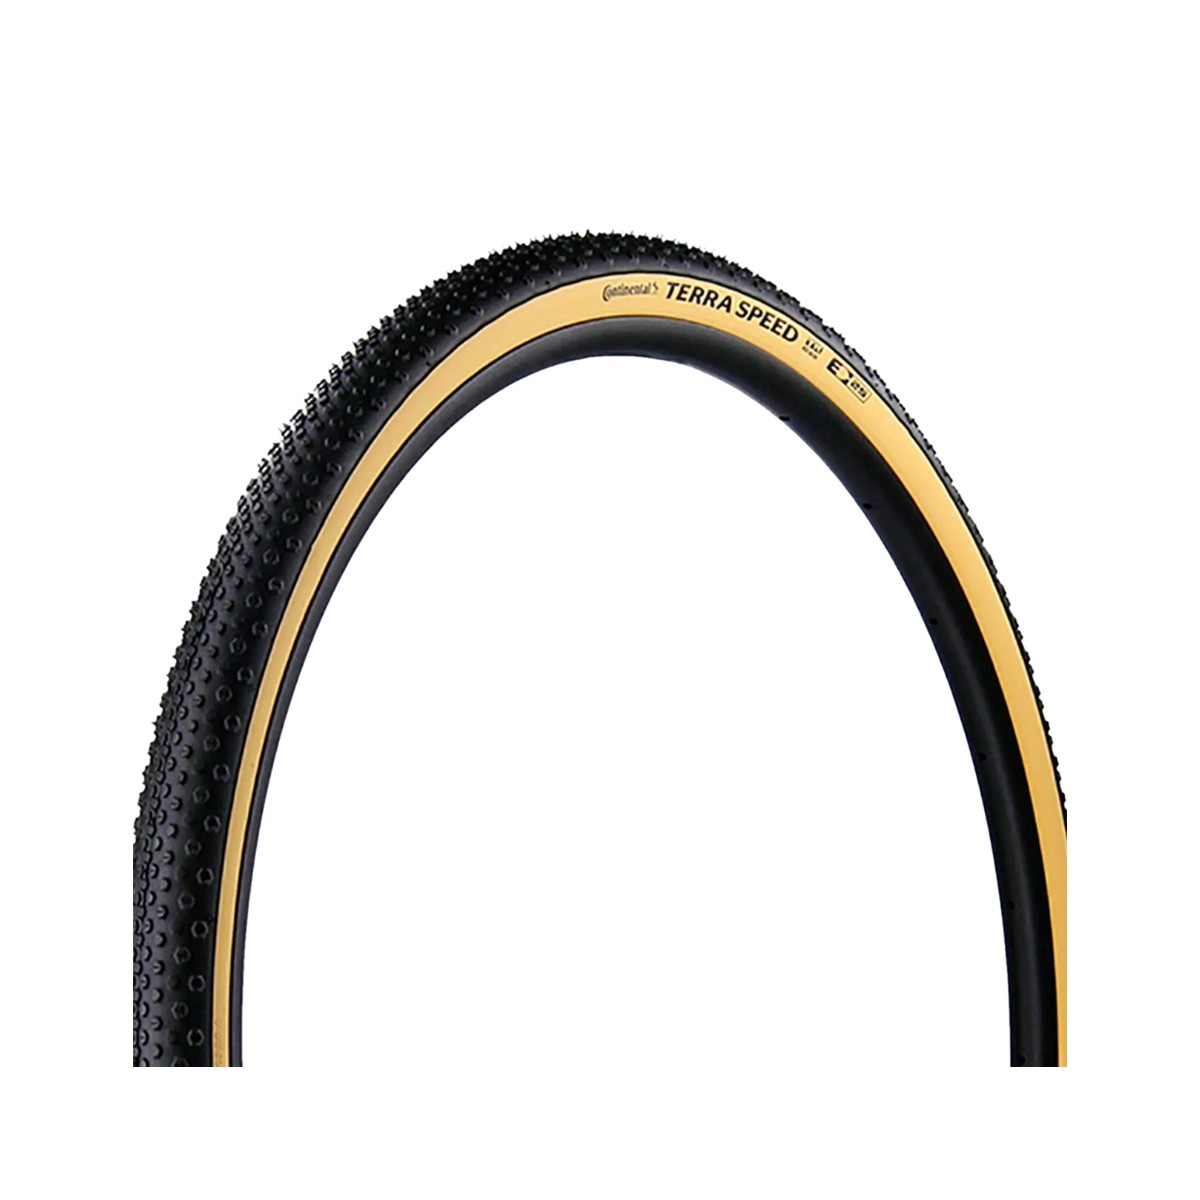 Tyre Continental Terra Speed ProTection 700x35-40 Cream Black, Type mm 700x35